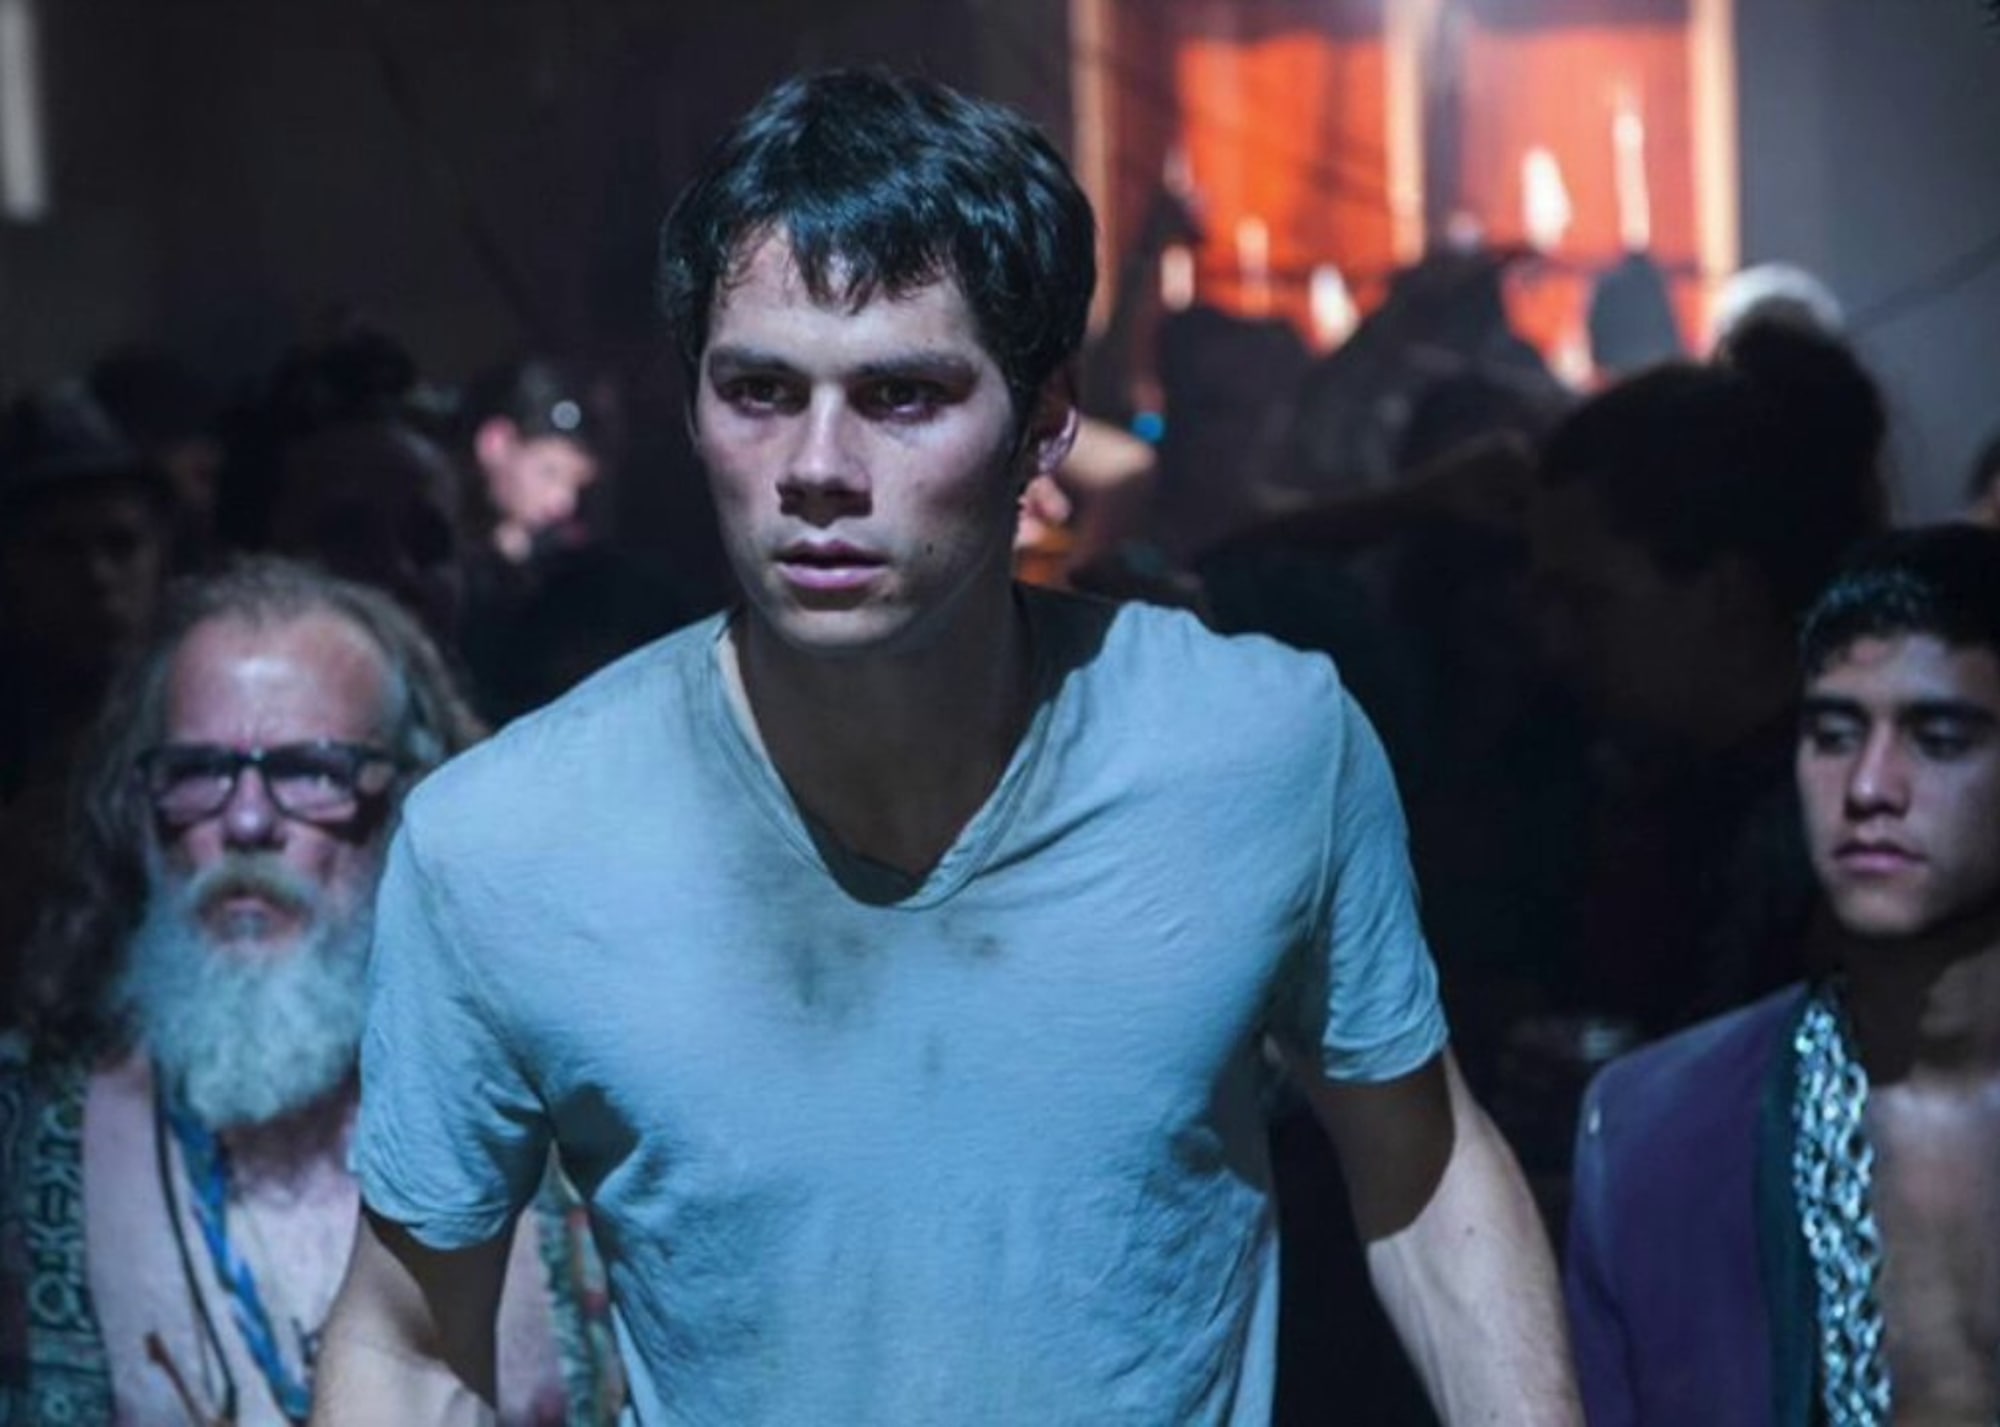 Maze Runner: The Death Cure” plays in Mason City